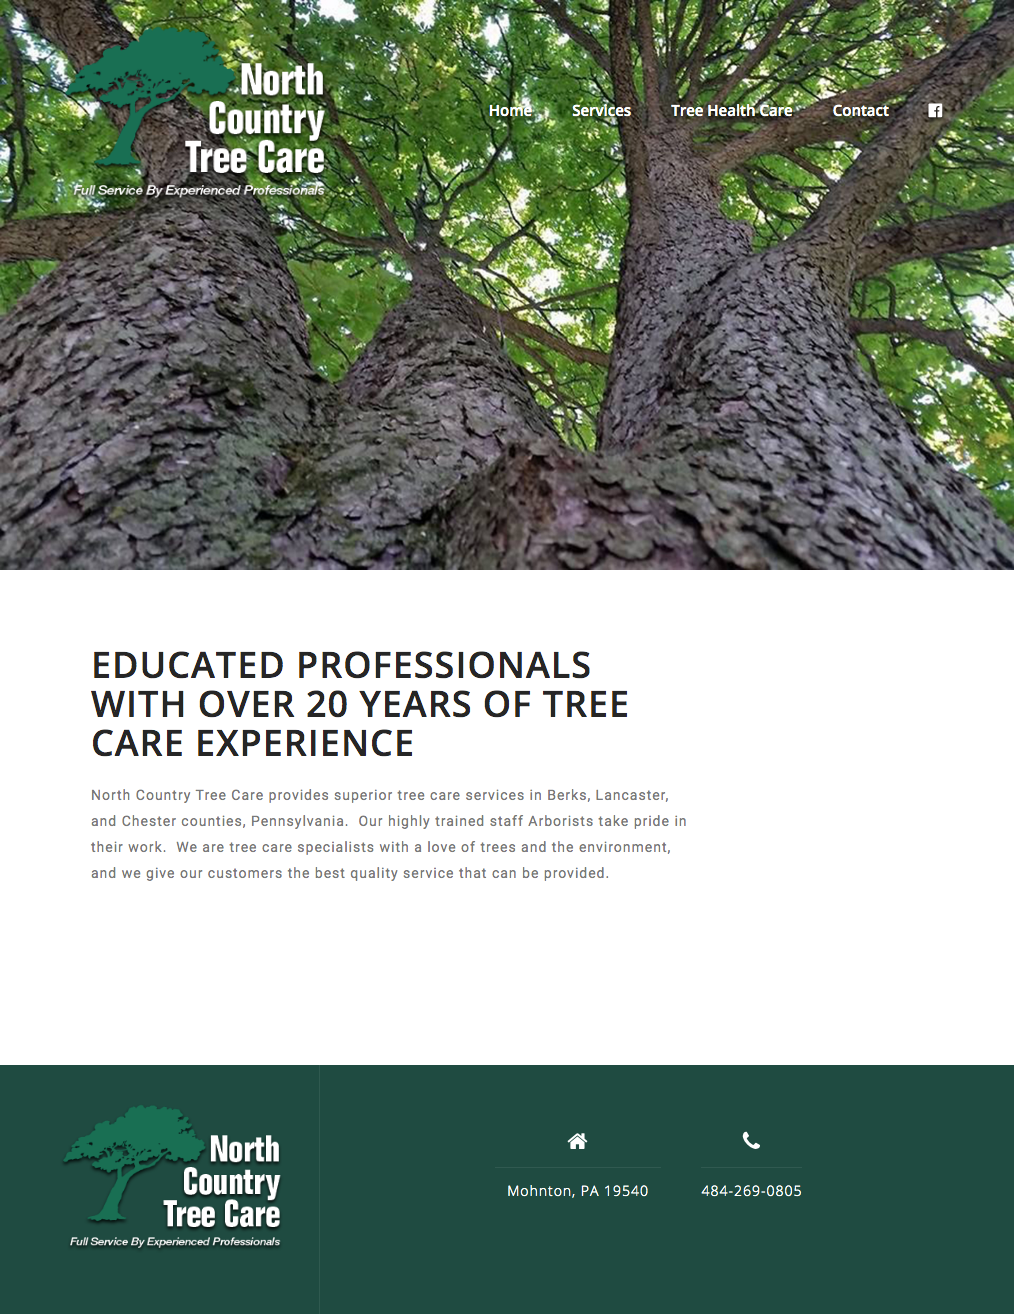 North Country Tree Care - TLS Mobile Friendly Website